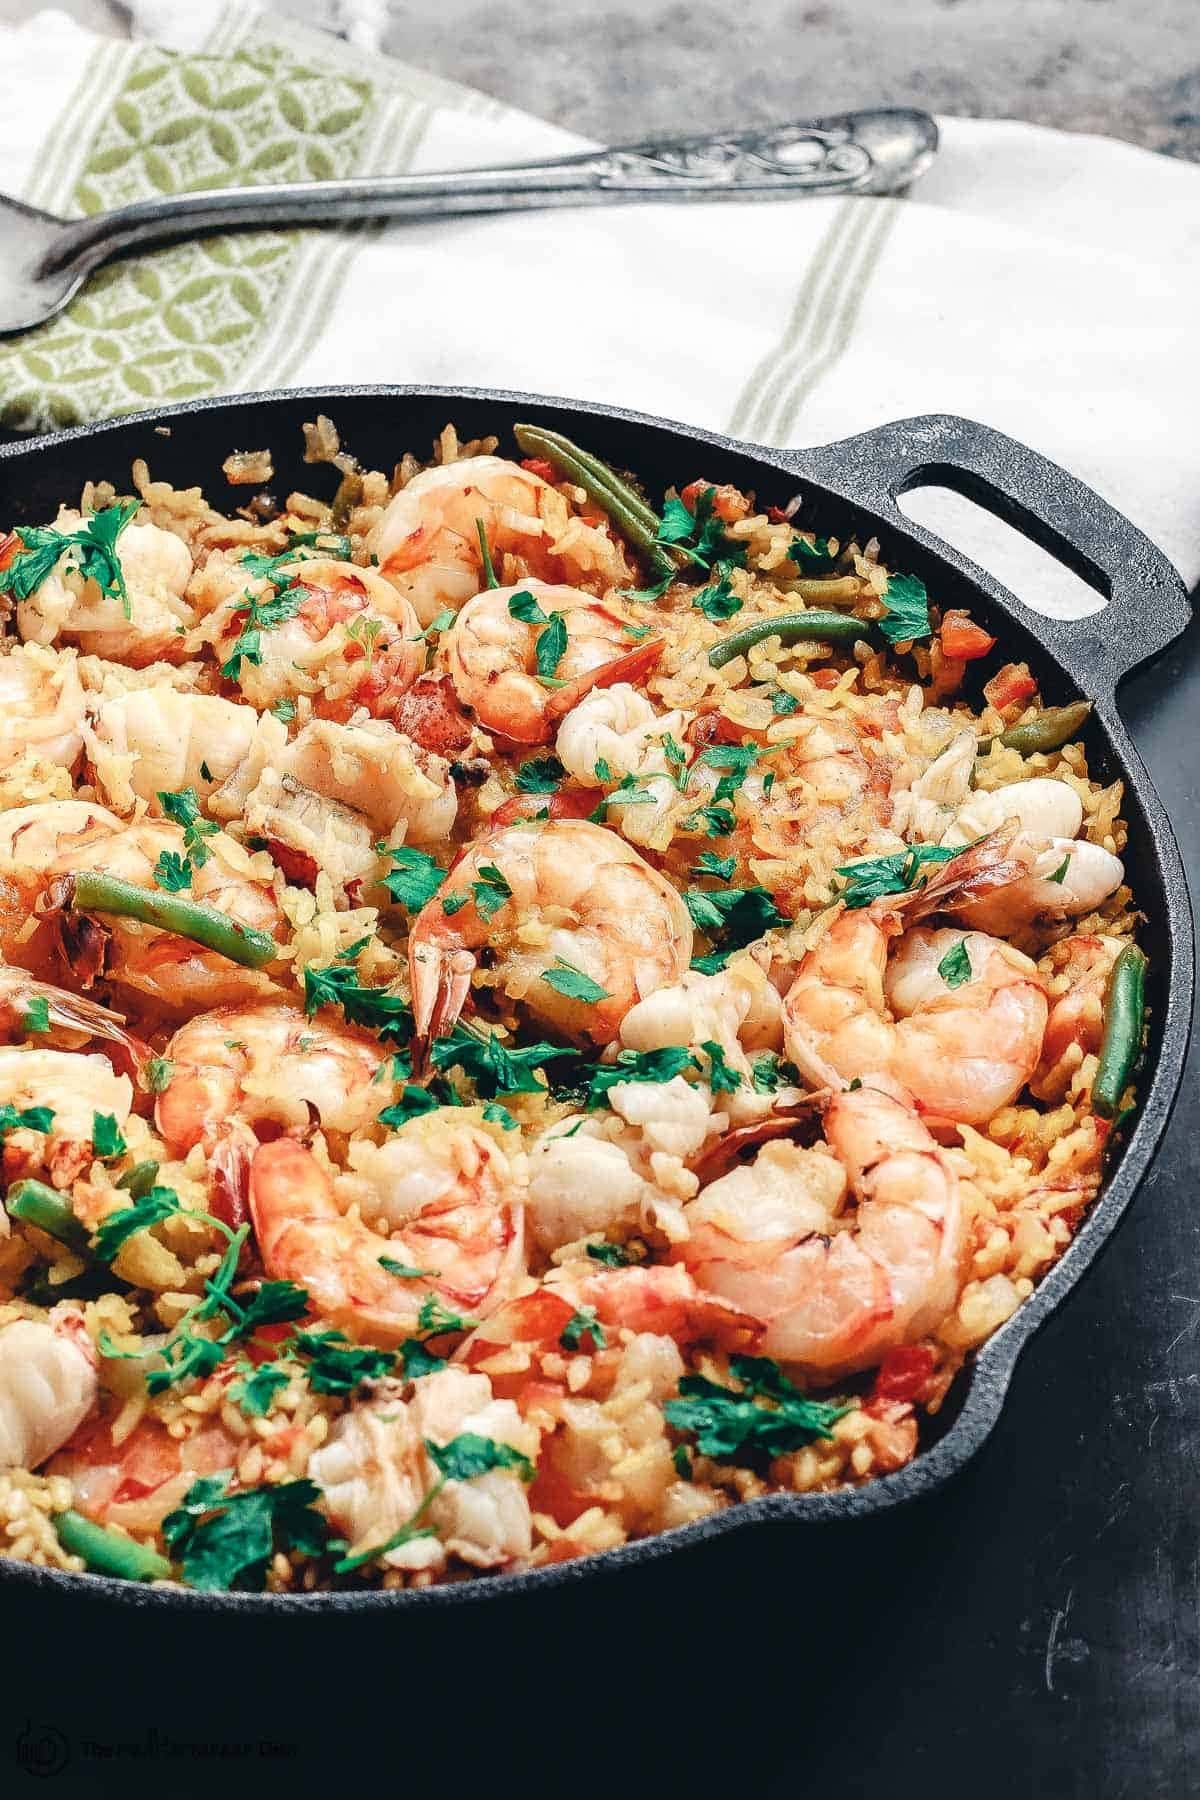 Spanish seafood paella in a skillet with  rice, shrimp, vegetables, and saffron.